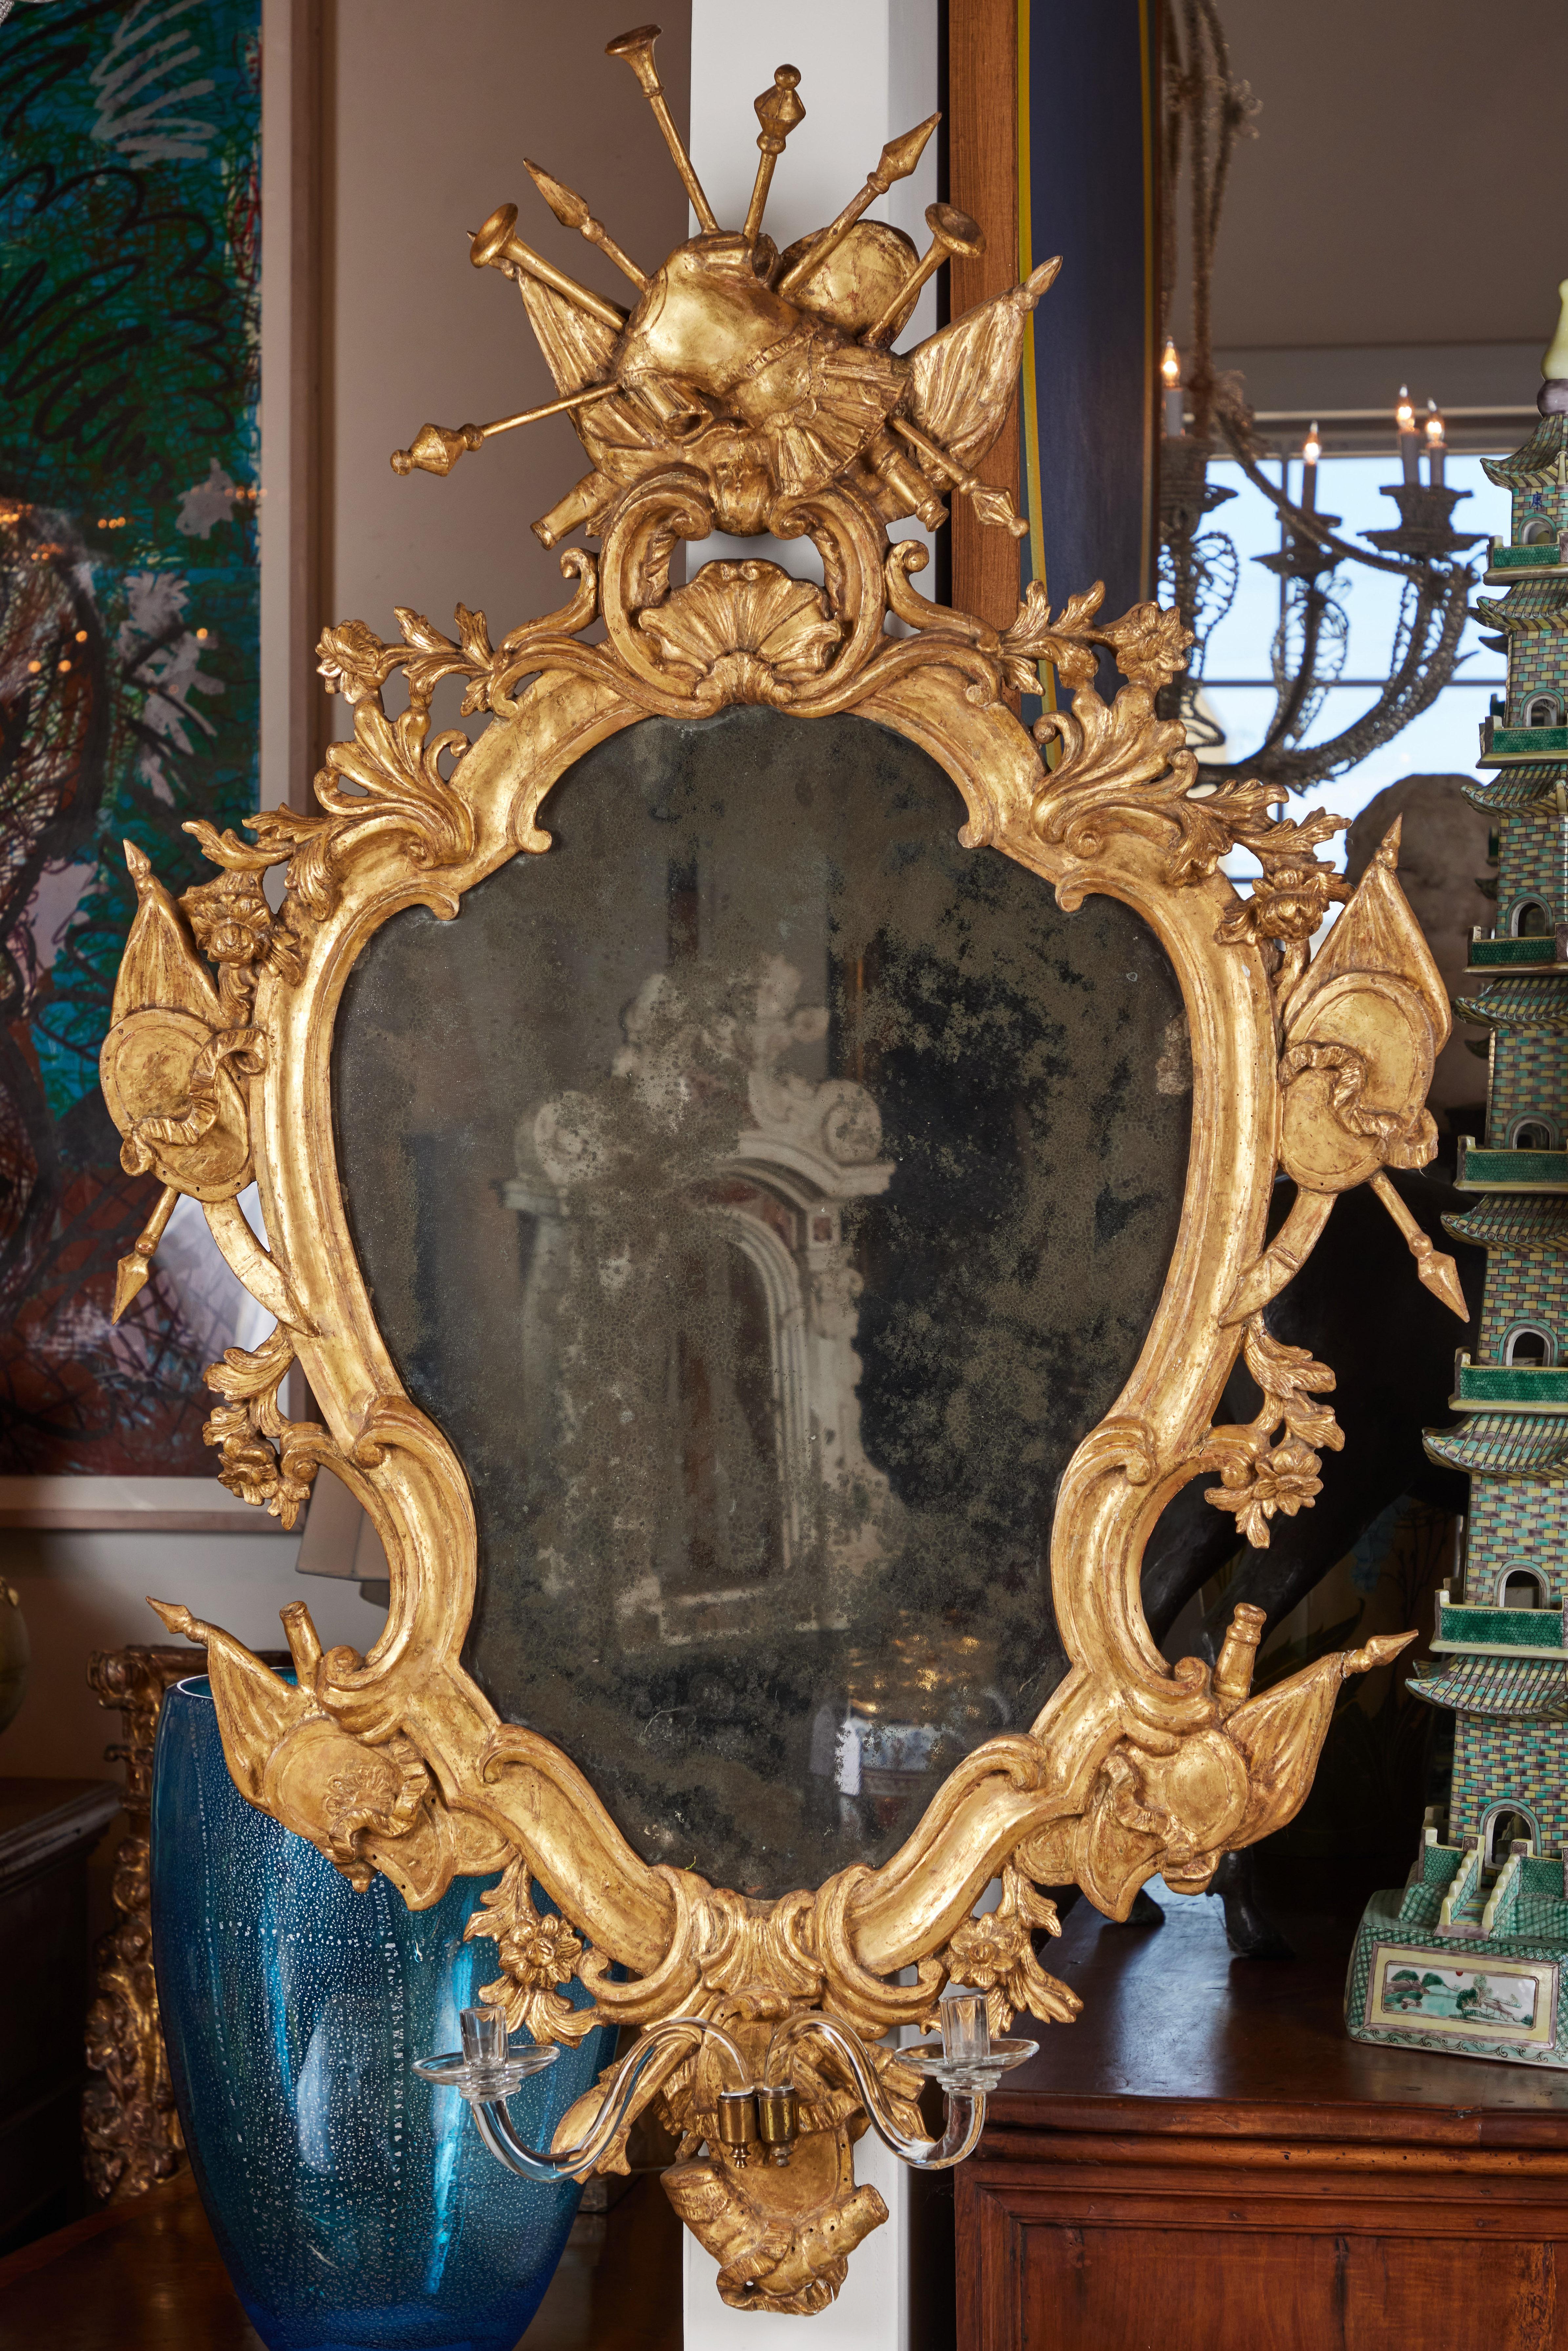 A large-scale, completely original pair of hand-carved, gessoed and 22k gold gilded Venetian crest form mirrors featuring foliate reliefs, flags and dramatic crowns comprised of battle armor and assorted regalia. Each with crystal candelabra at